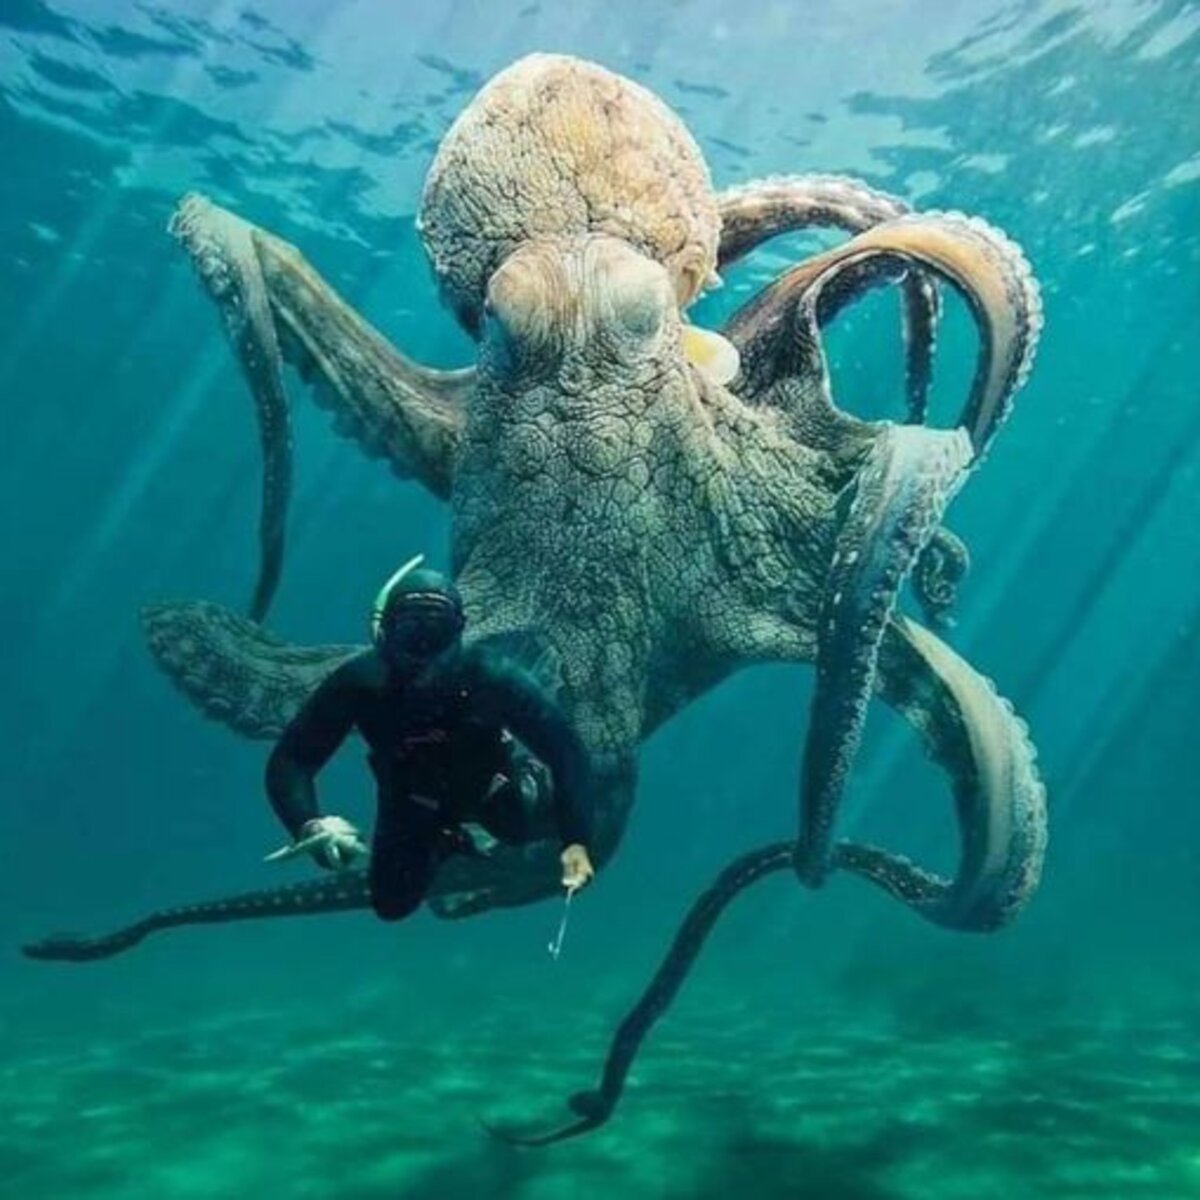 Giant Pacific octopus: the largest octopus species